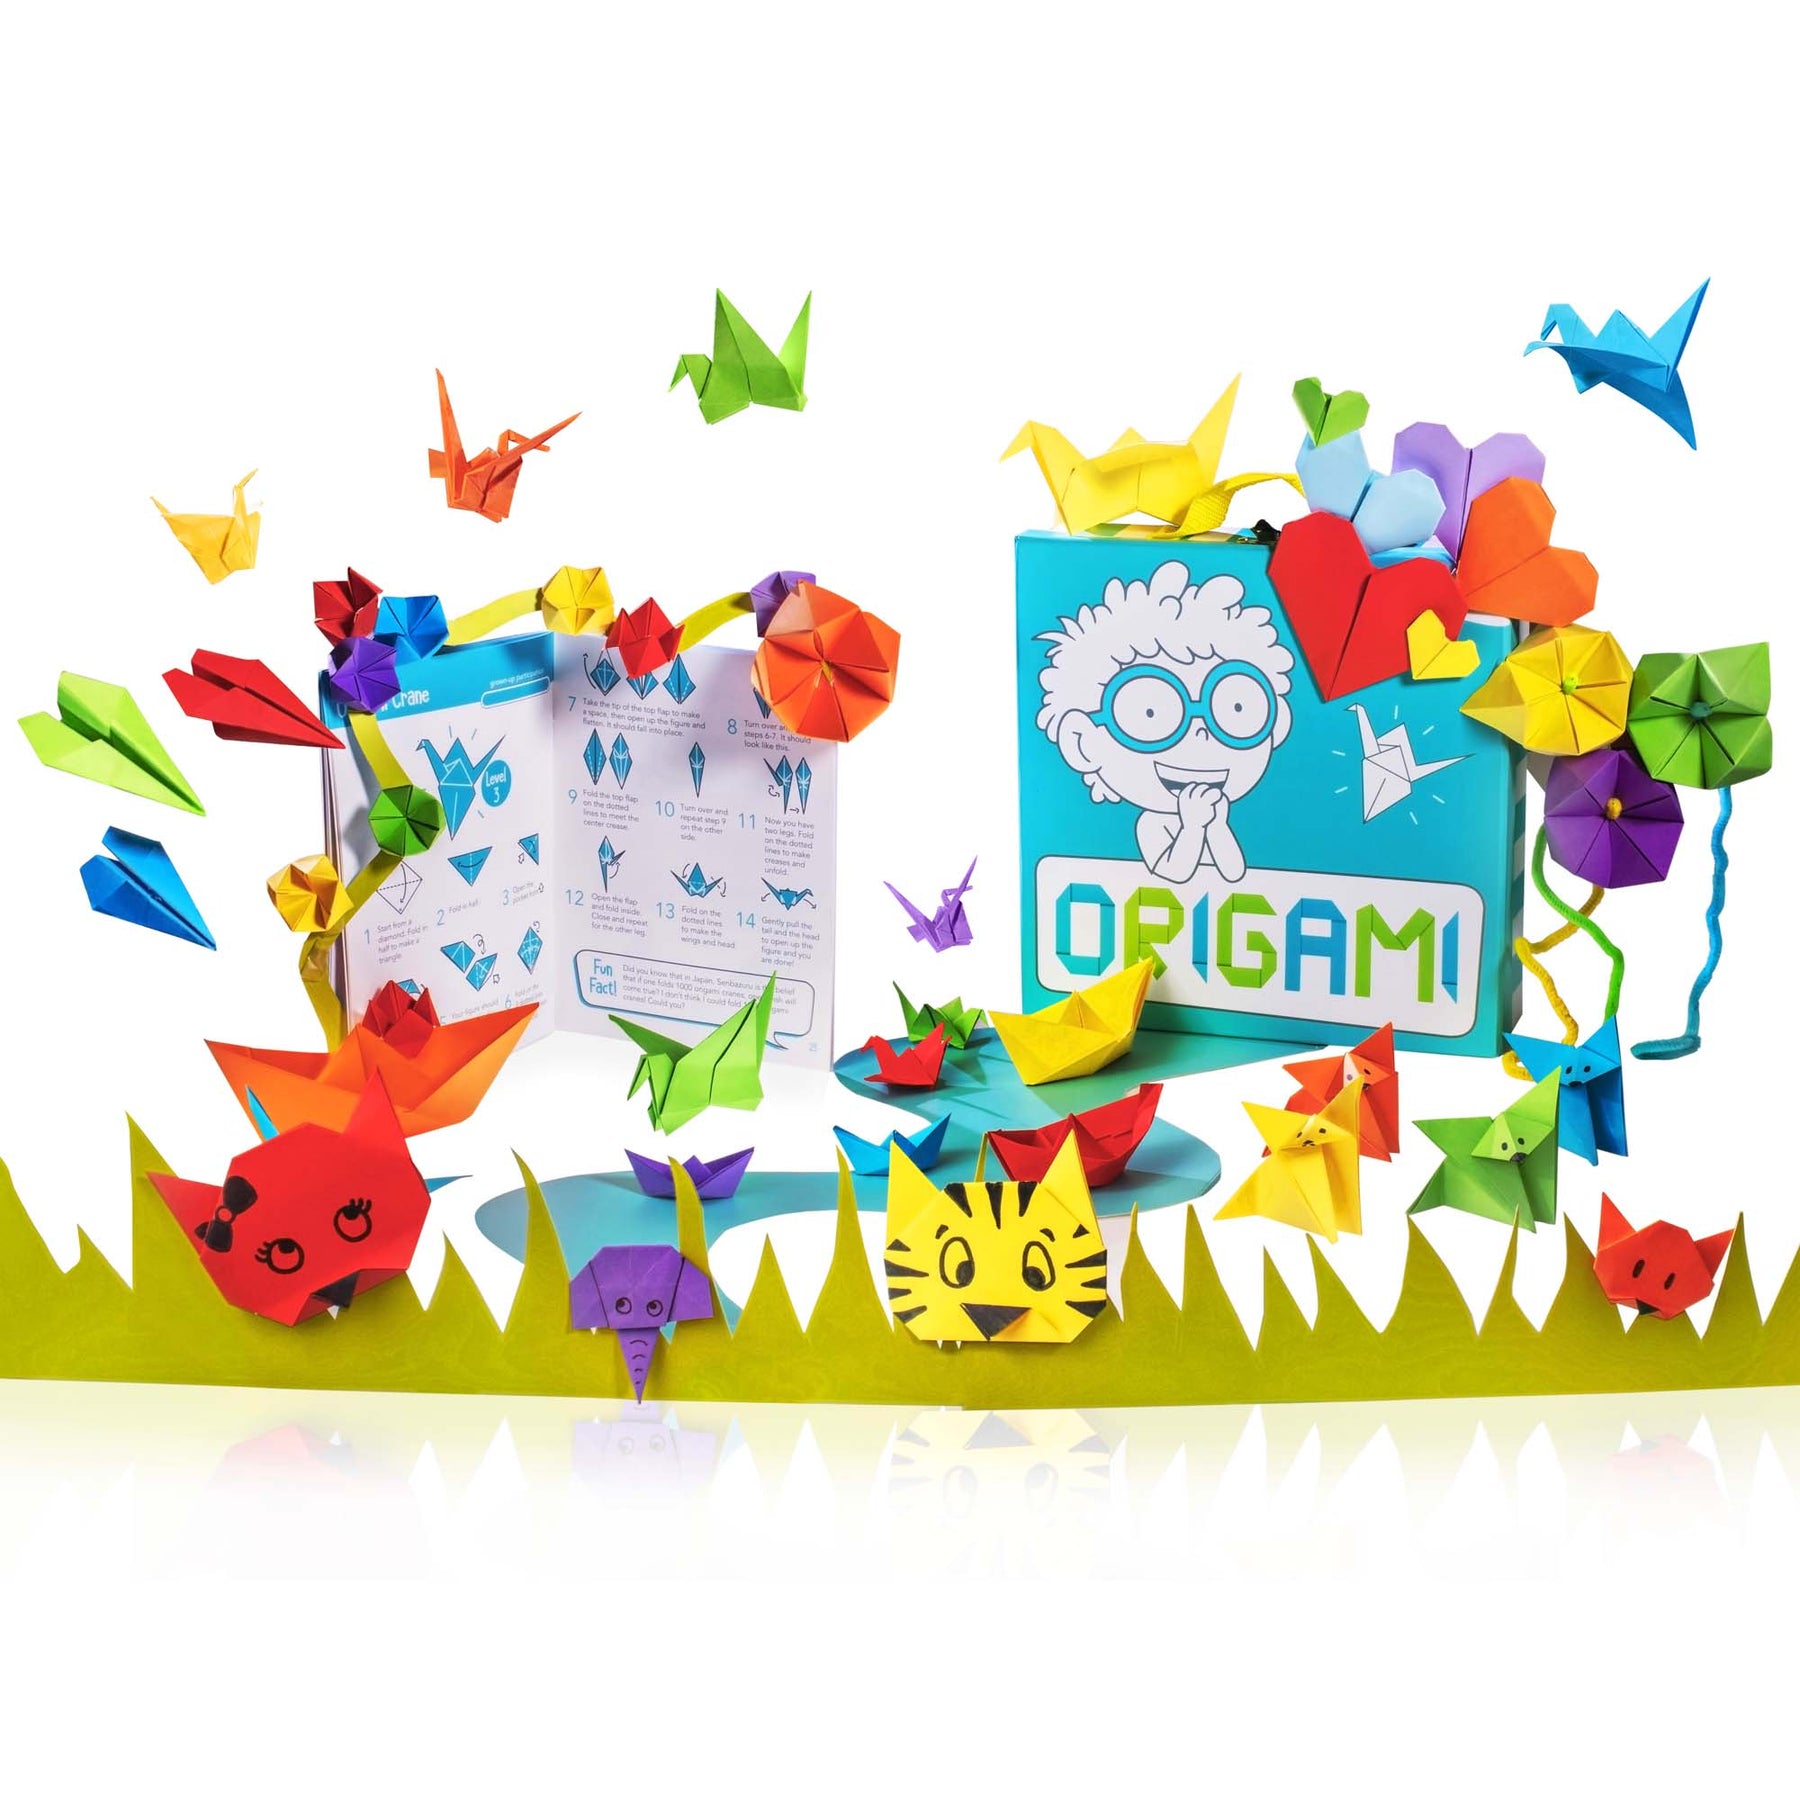 Open The Joy Origami Kit for Kids - 150 Double Sided Multi Colored Origami Paper Set - Easy to Hard Level Origami Projects - 32 Page Origami Book